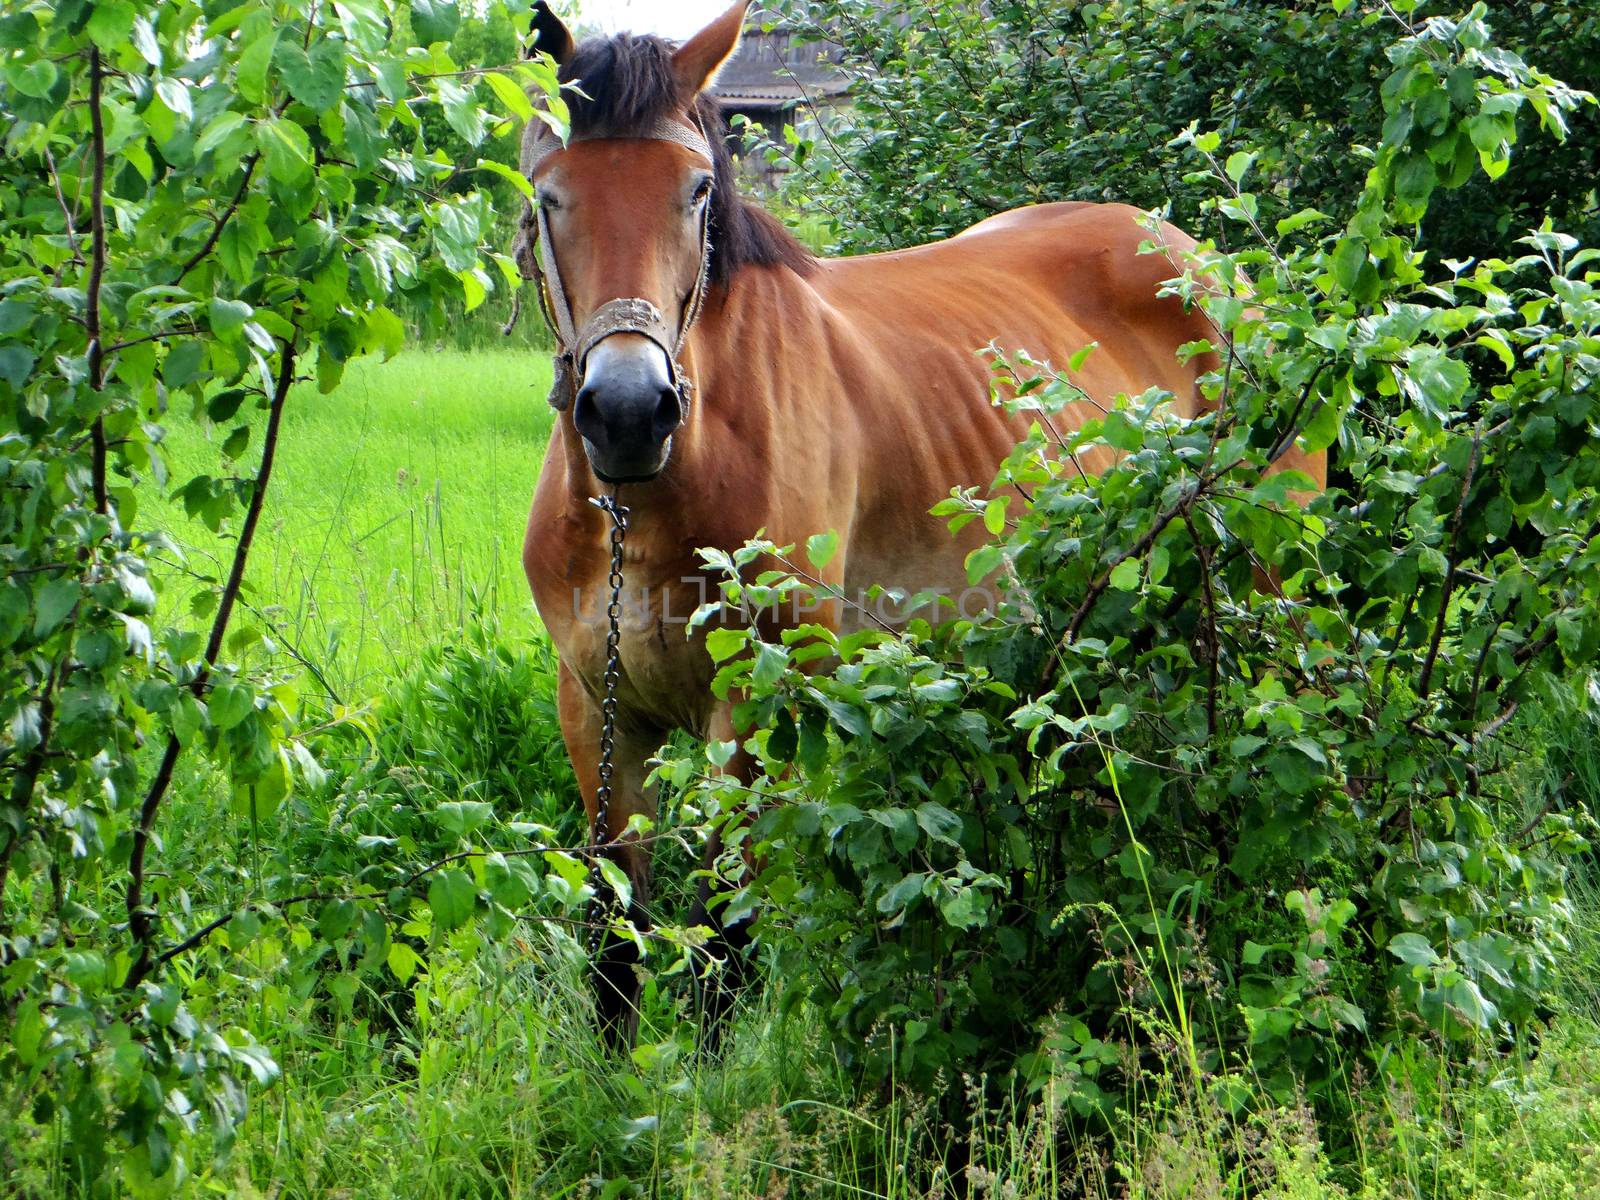 Horse in a green rustic garden by natali_brill